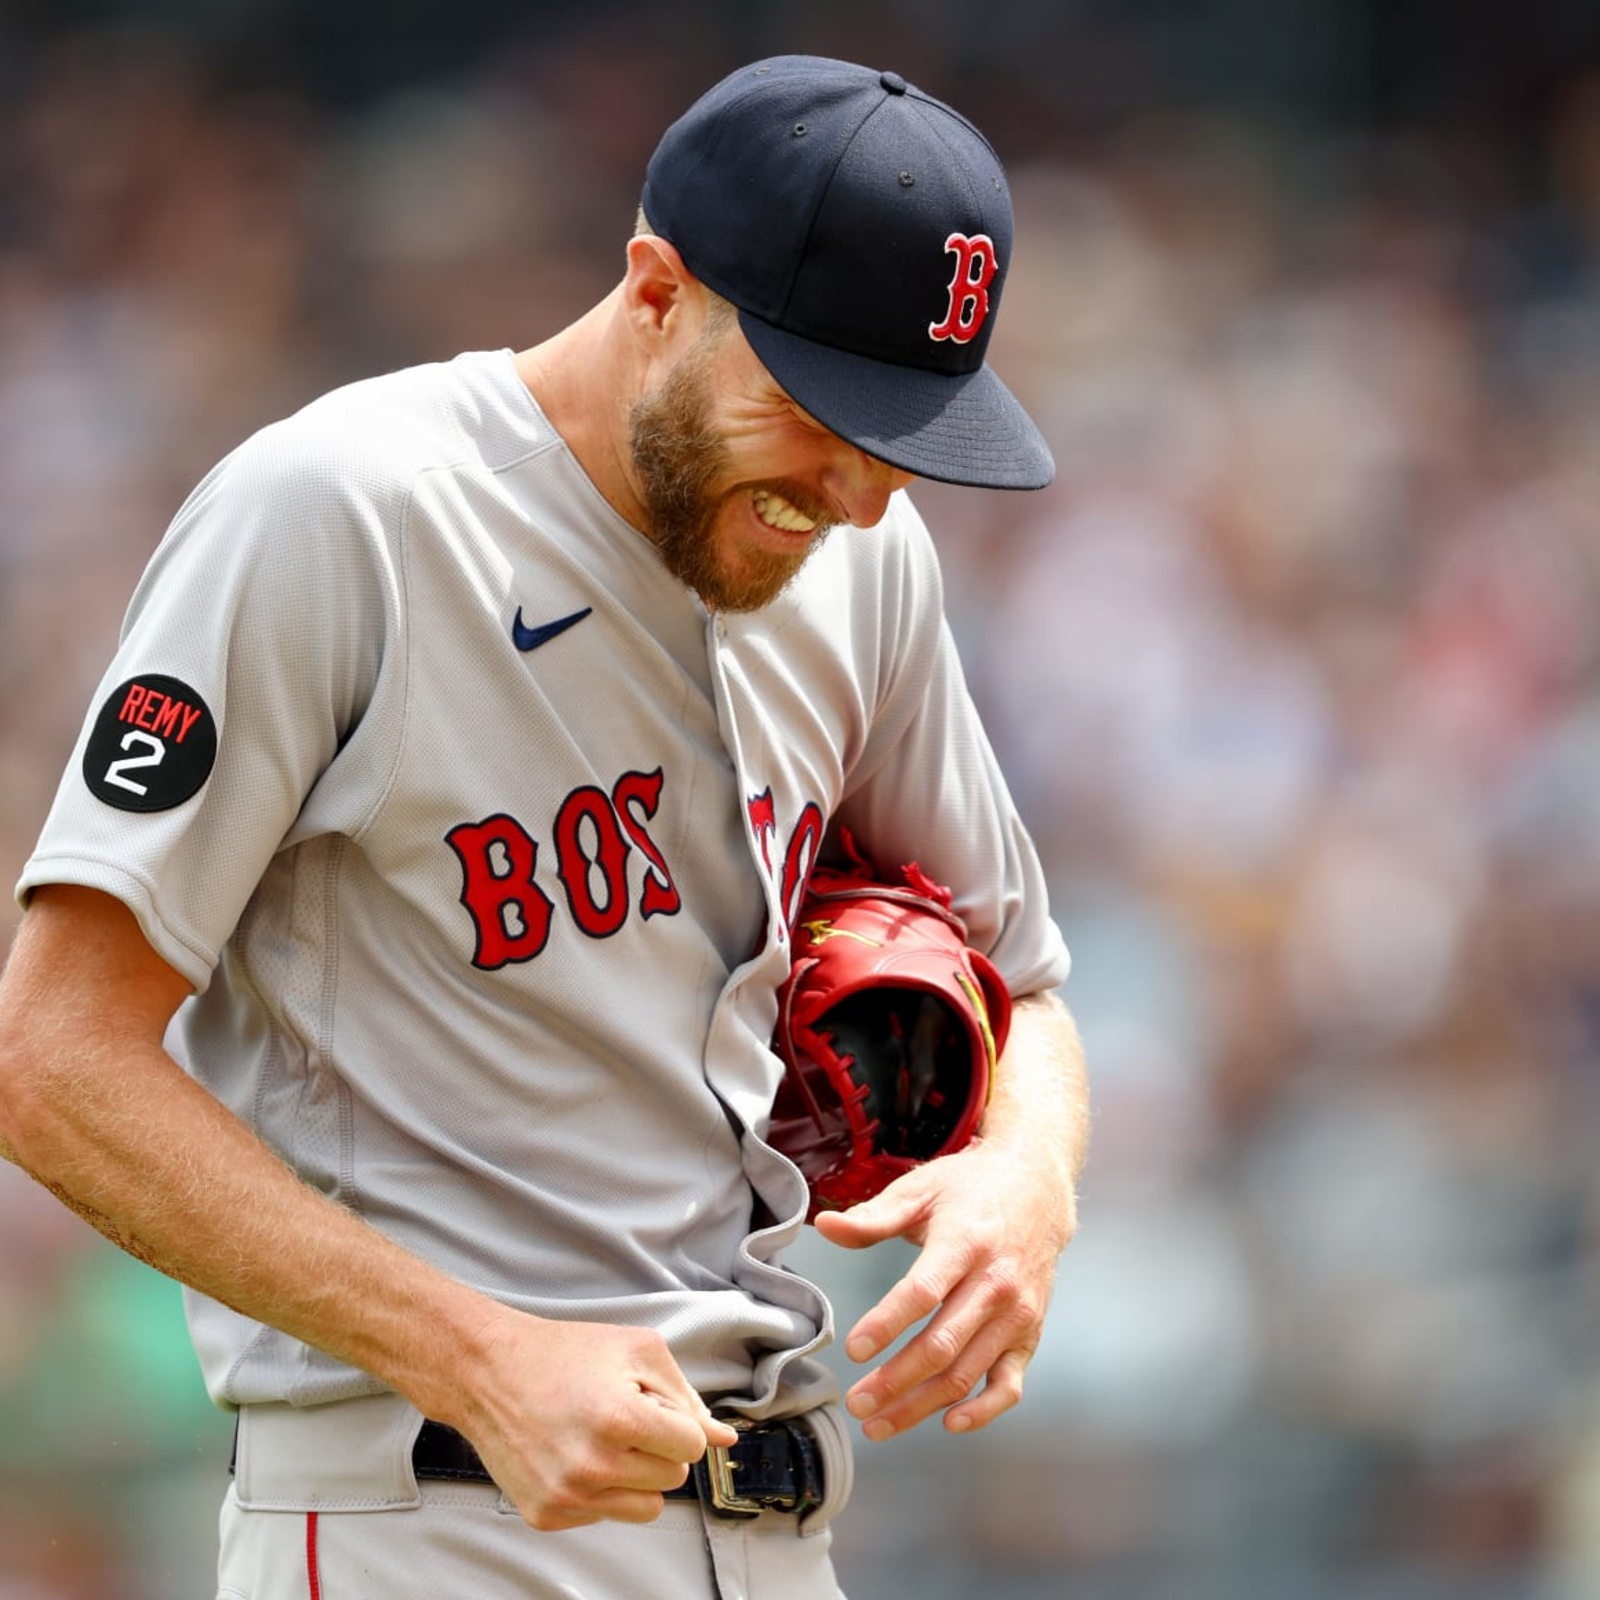 Red Sox's Chris Sale Broke Wrist While Riding Bike, Out for Season